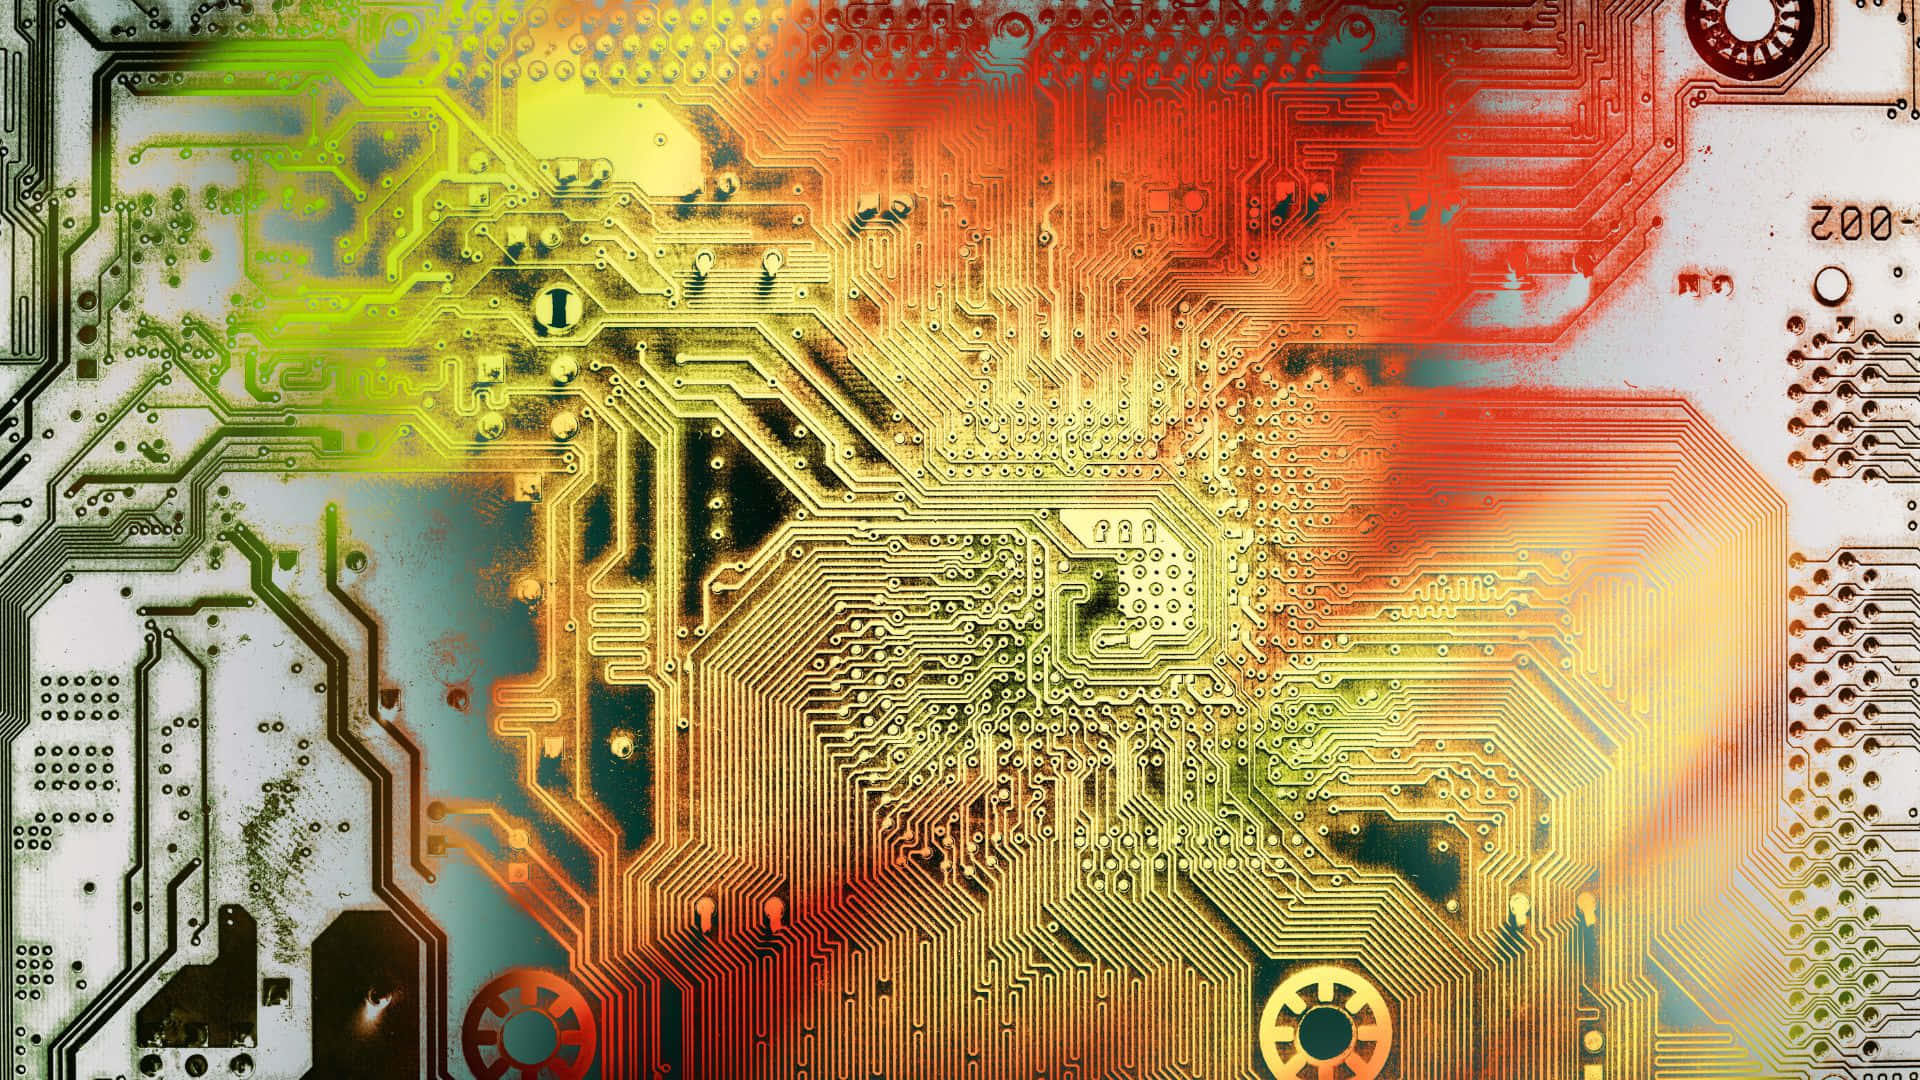 An intricately designed circuit board with a unique pattern of wires